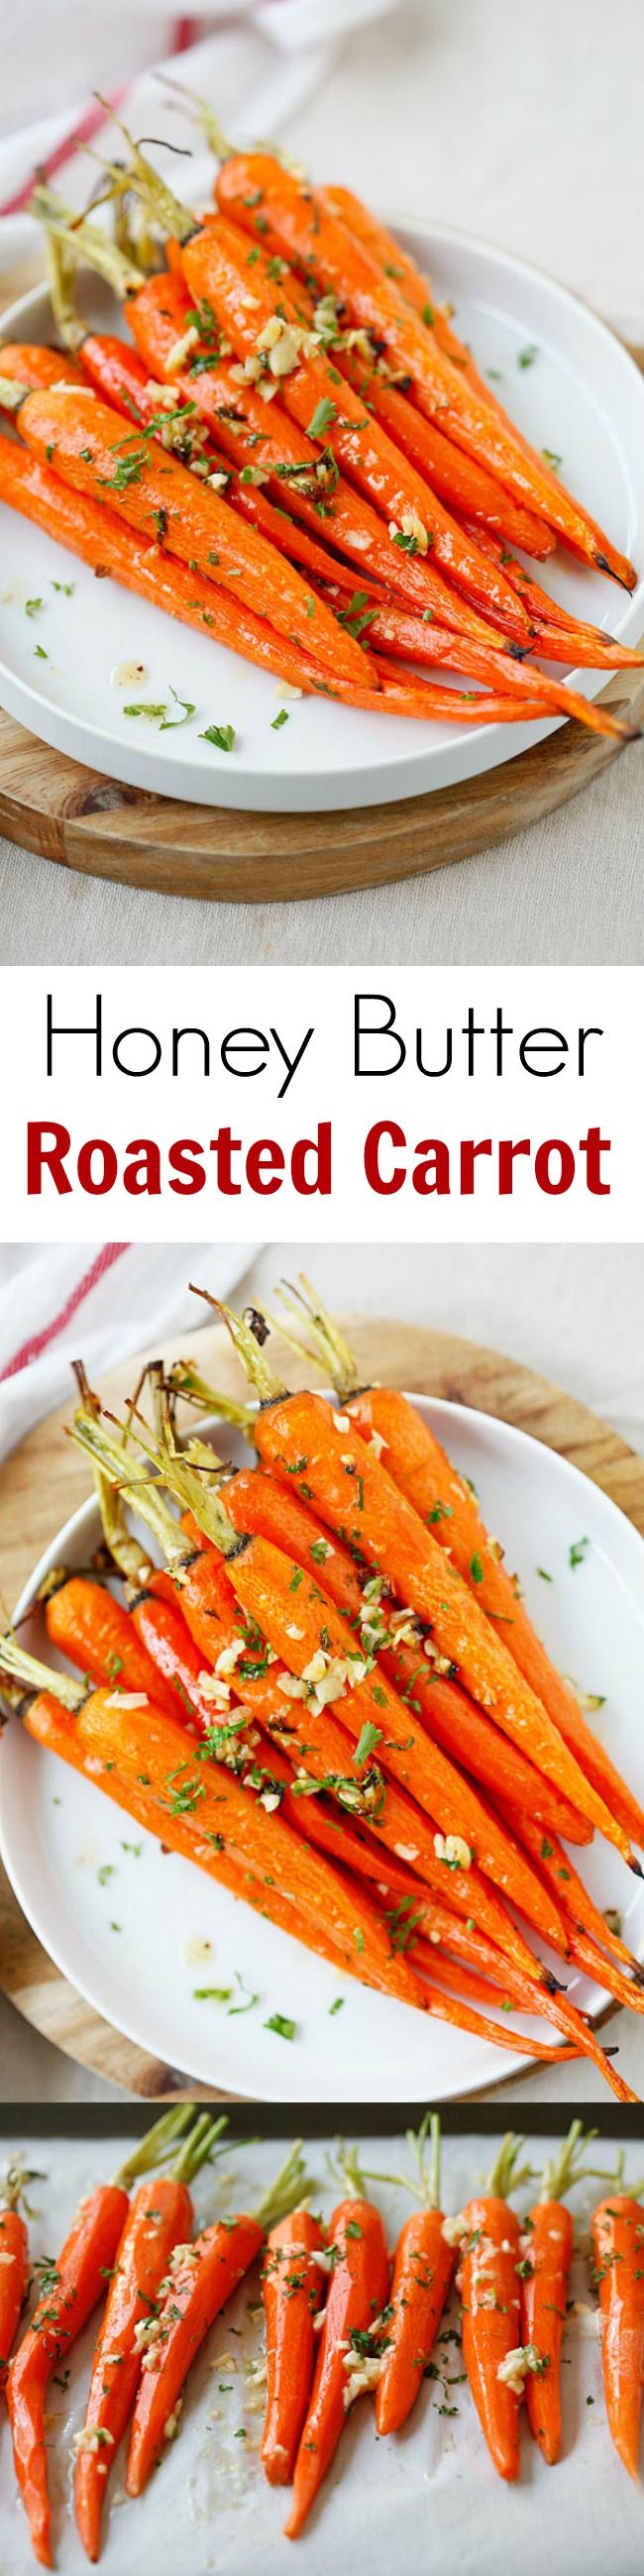 Honey Butter Roasted Carrots – the most delicious and tender roasted carrots, with honey, butter and garlic. So easy and takes 10 mins to prep | rasamalaysia.com